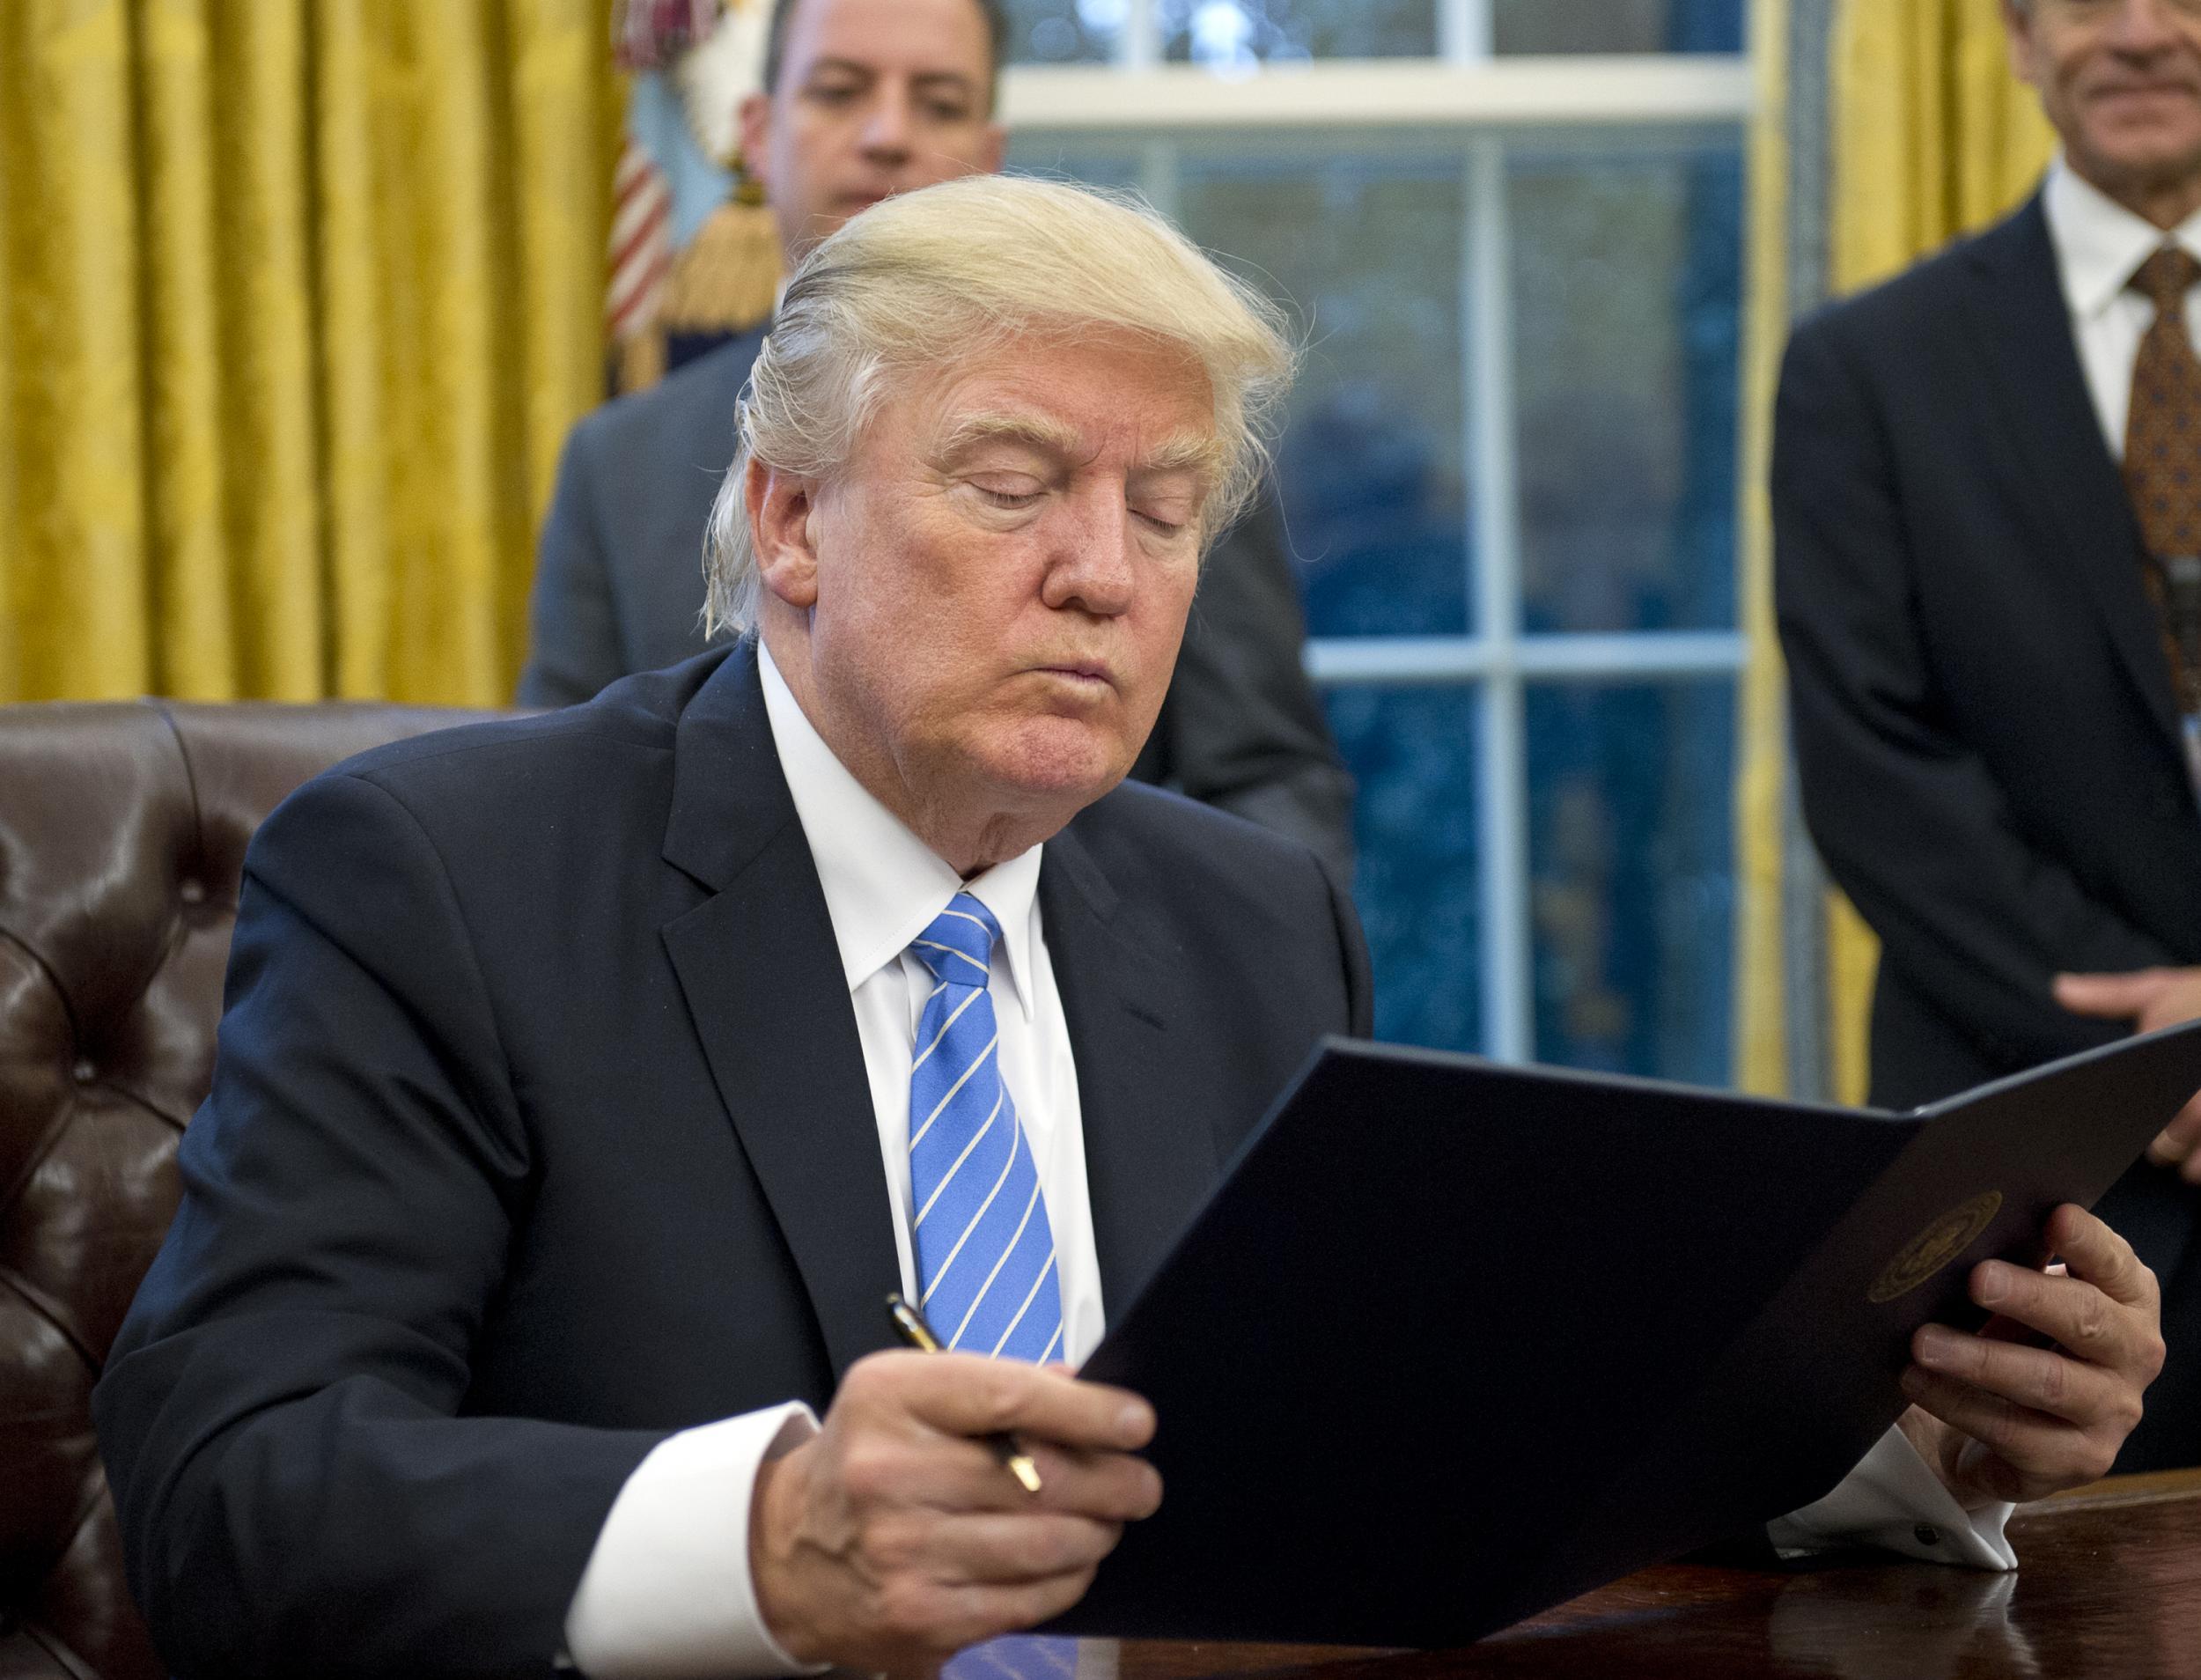 Donald Trump signing an executive order in the Oval Office